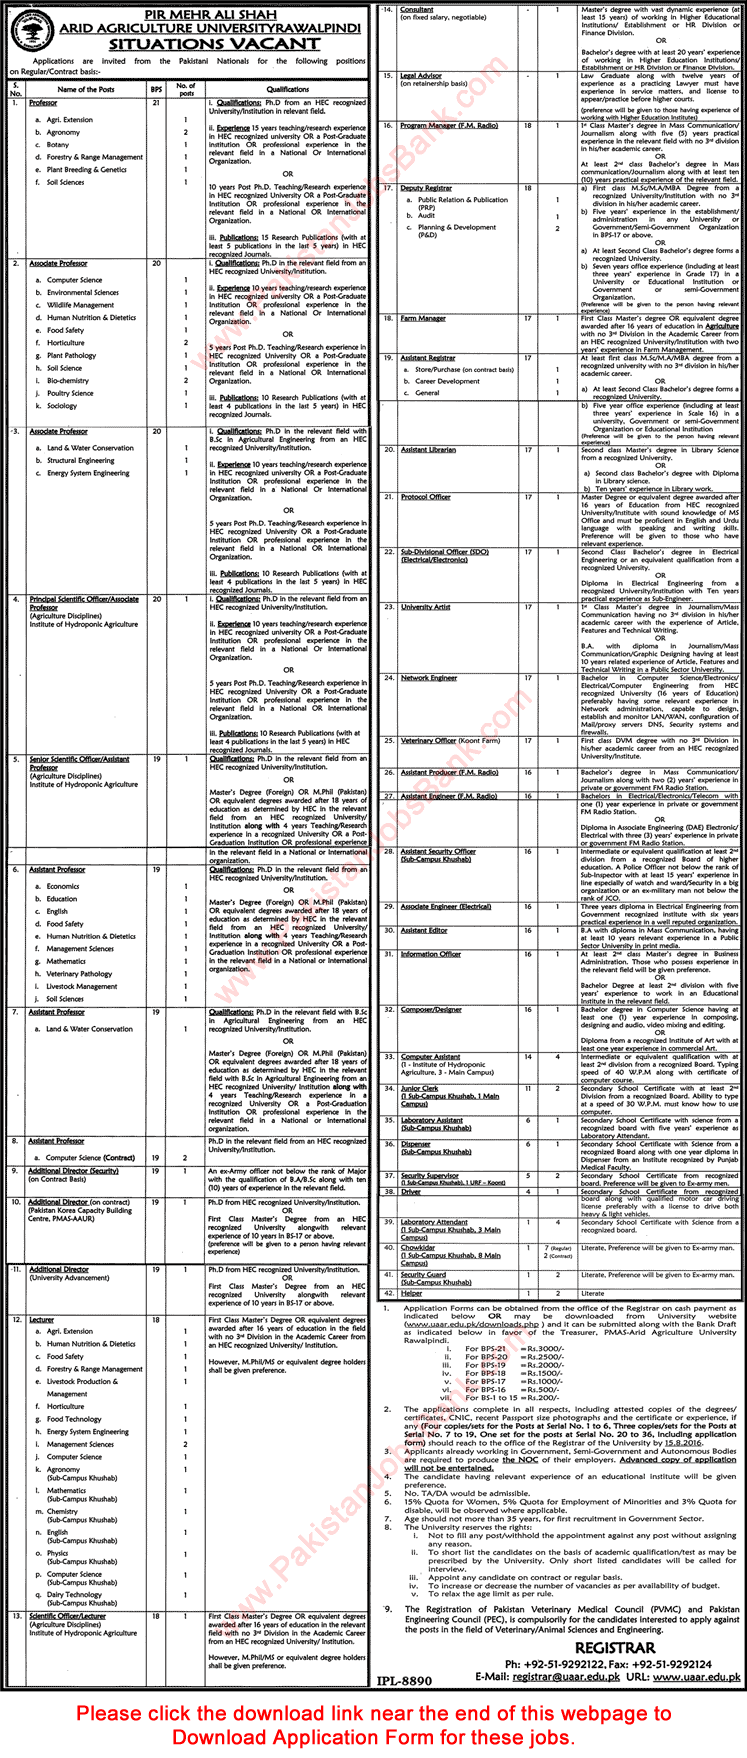 Arid Agriculture University Rawalpindi Jobs July 2016 Application Form Teaching Faculty & Others Latest / New